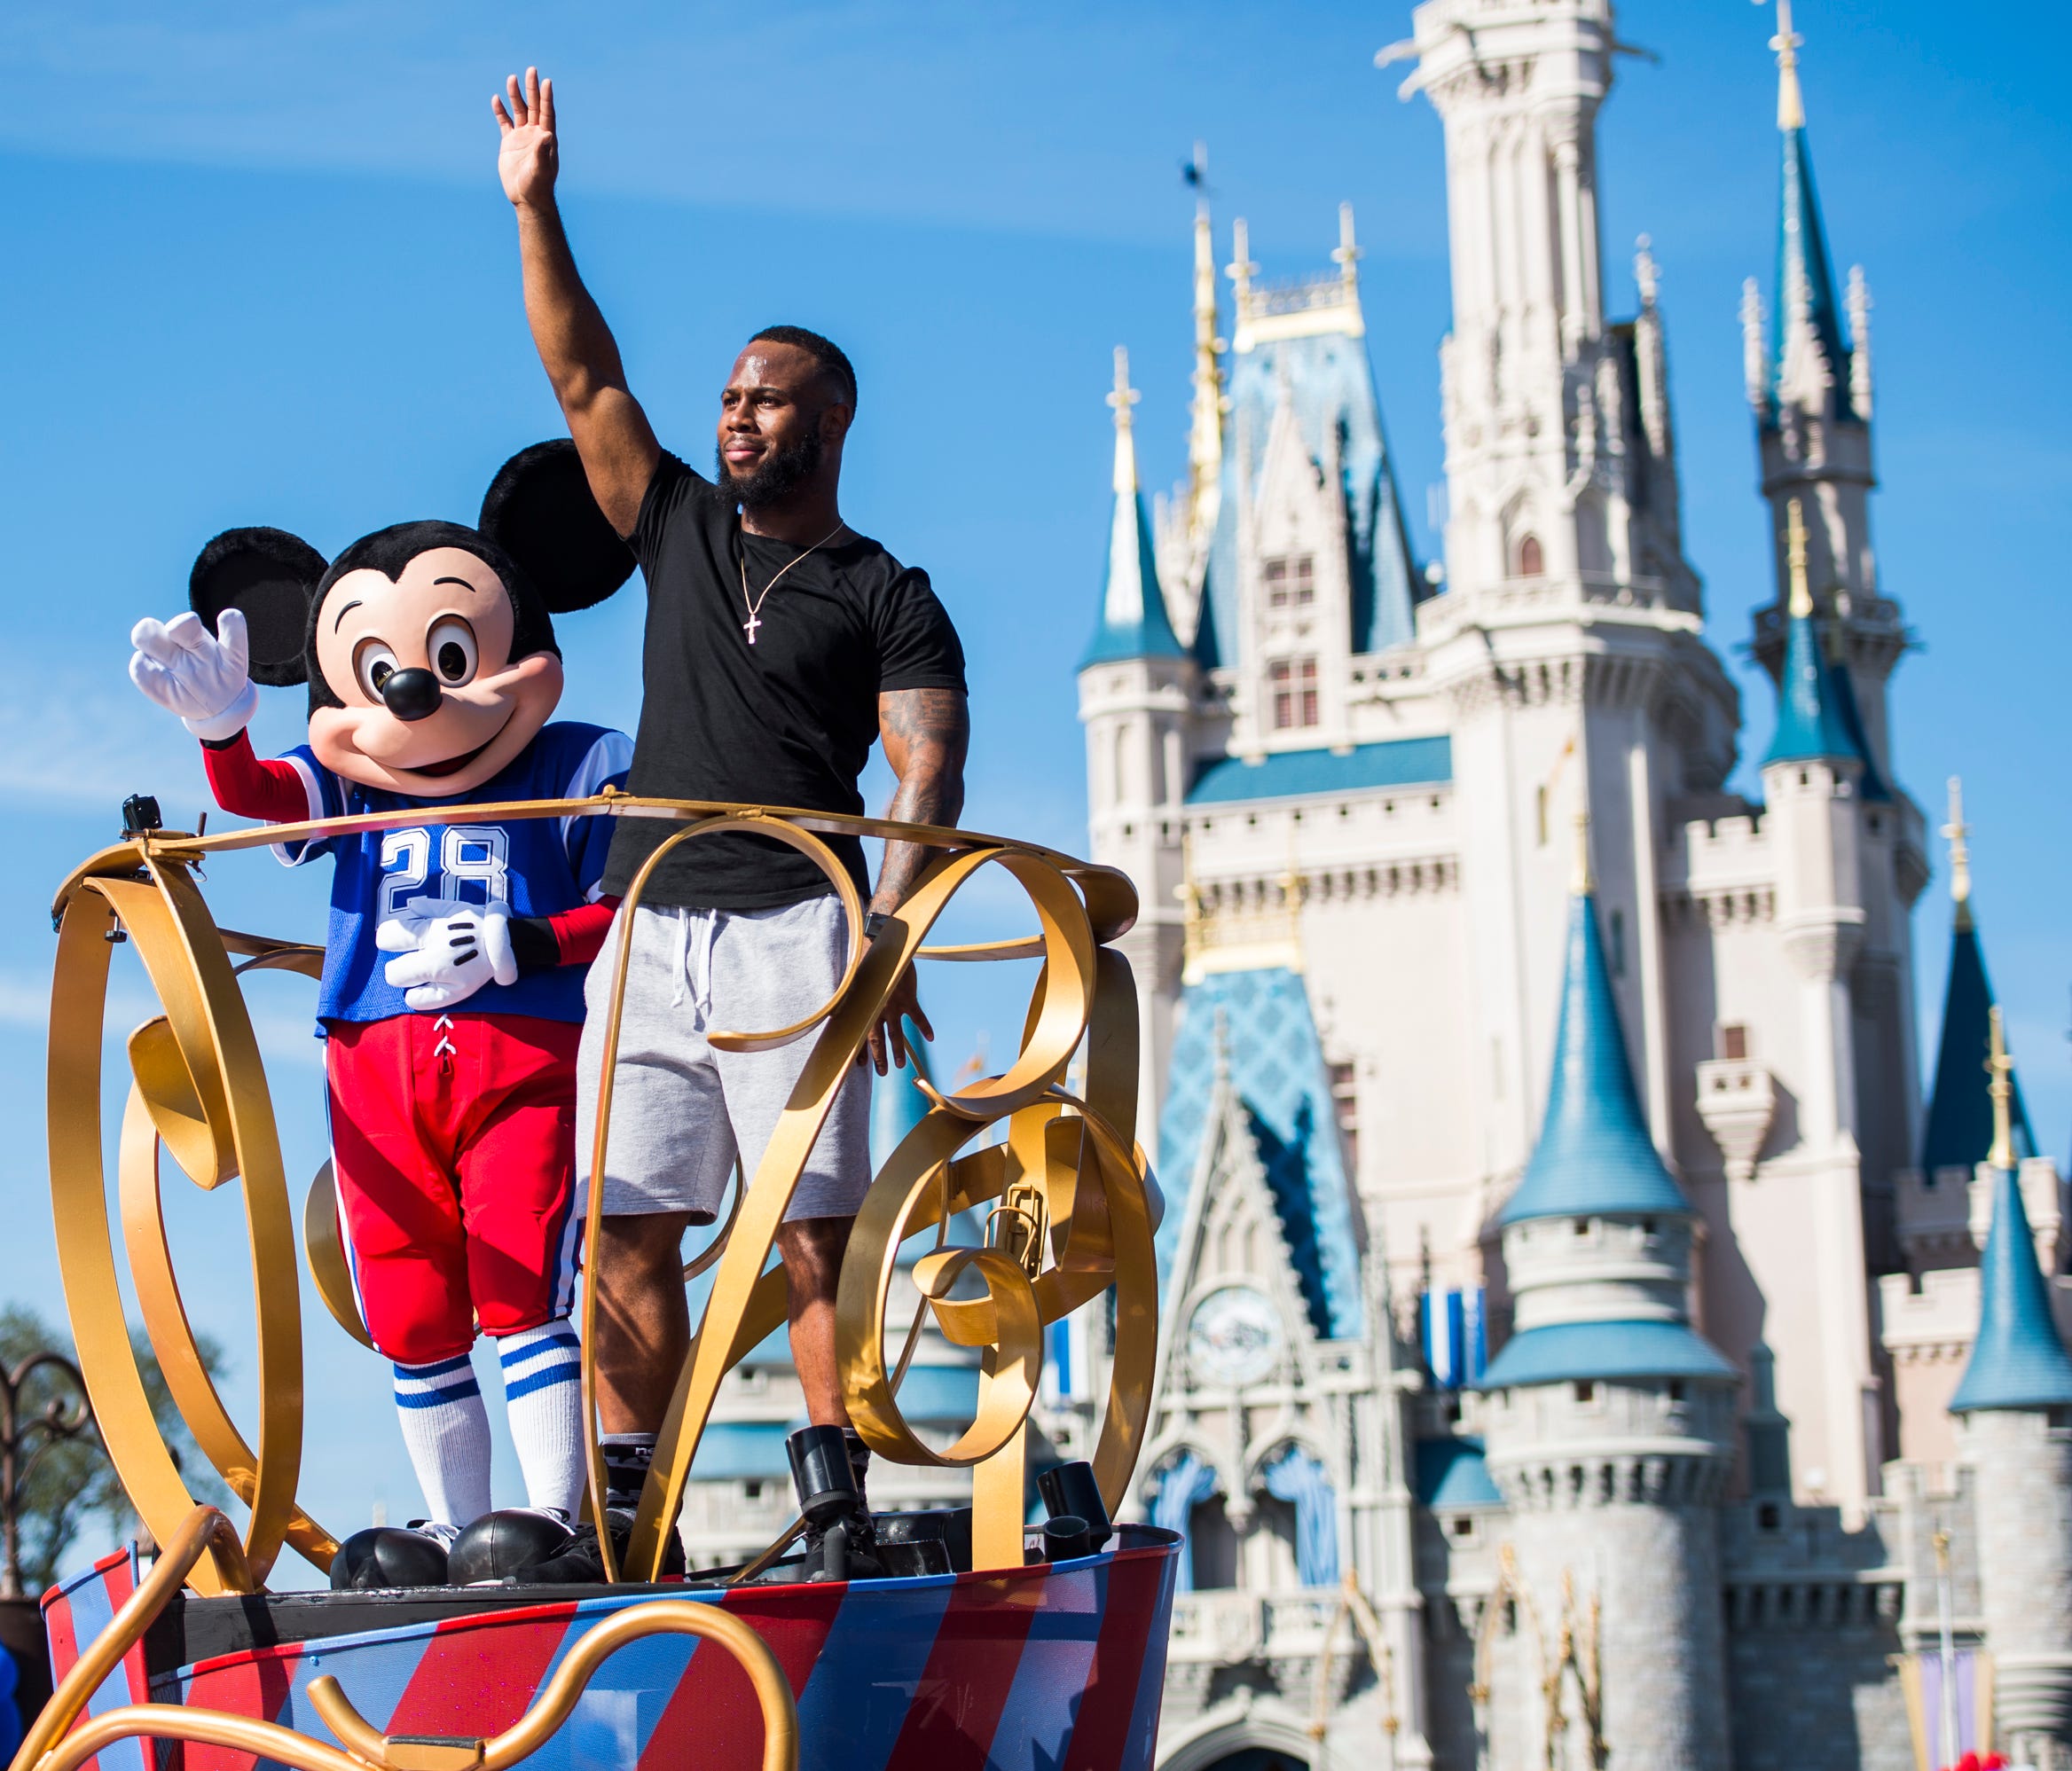 The company behind Mickey Mouse, shown here with running back James White of the New England Patriots on Feb. 6, 2017, at Walt Disney World in Buena Vista, Fla., increased security before the Oct. 1, 2017, Las Vegas shootings but likely will look for